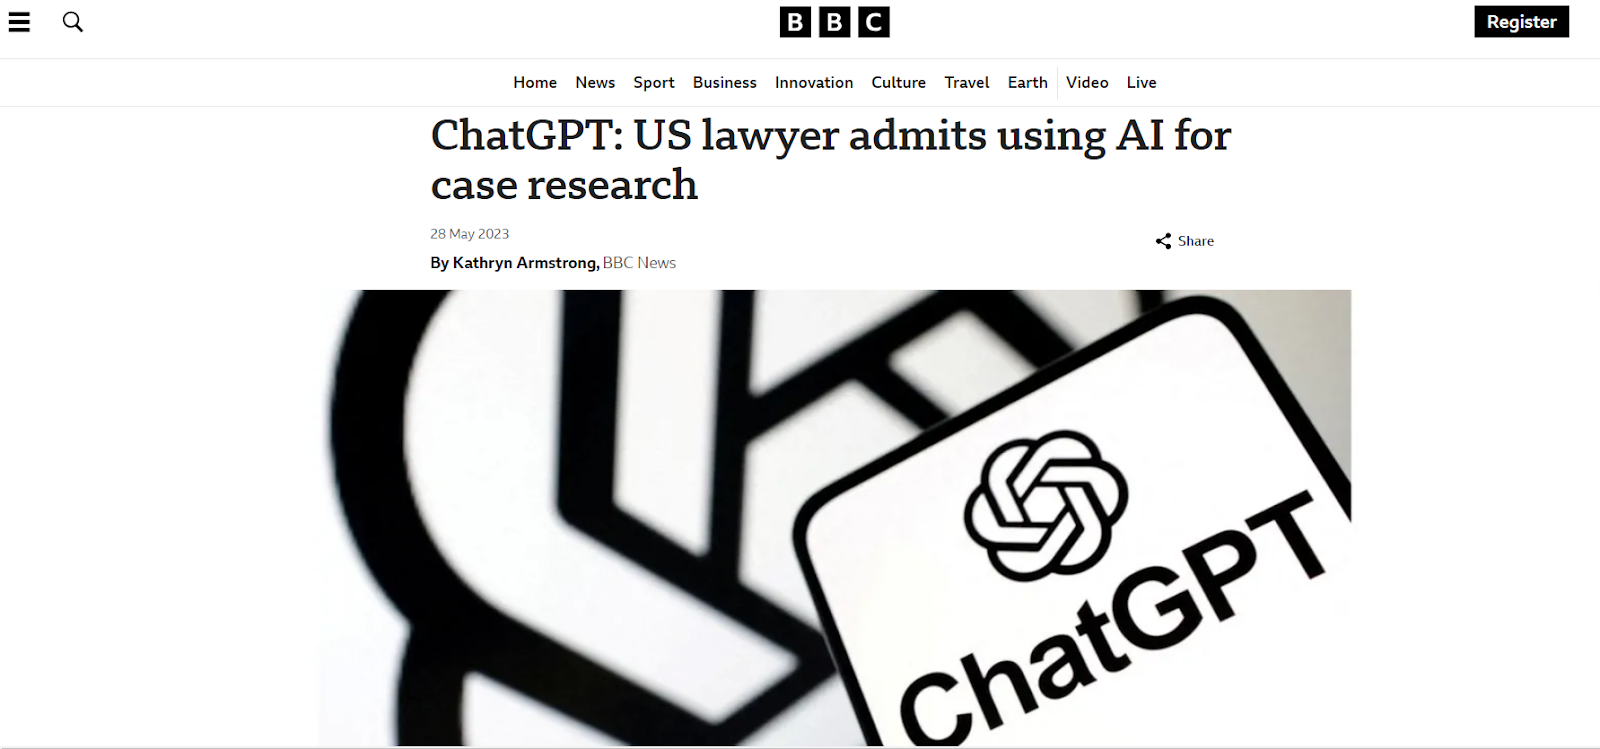 US lawyer admits using AI for case research